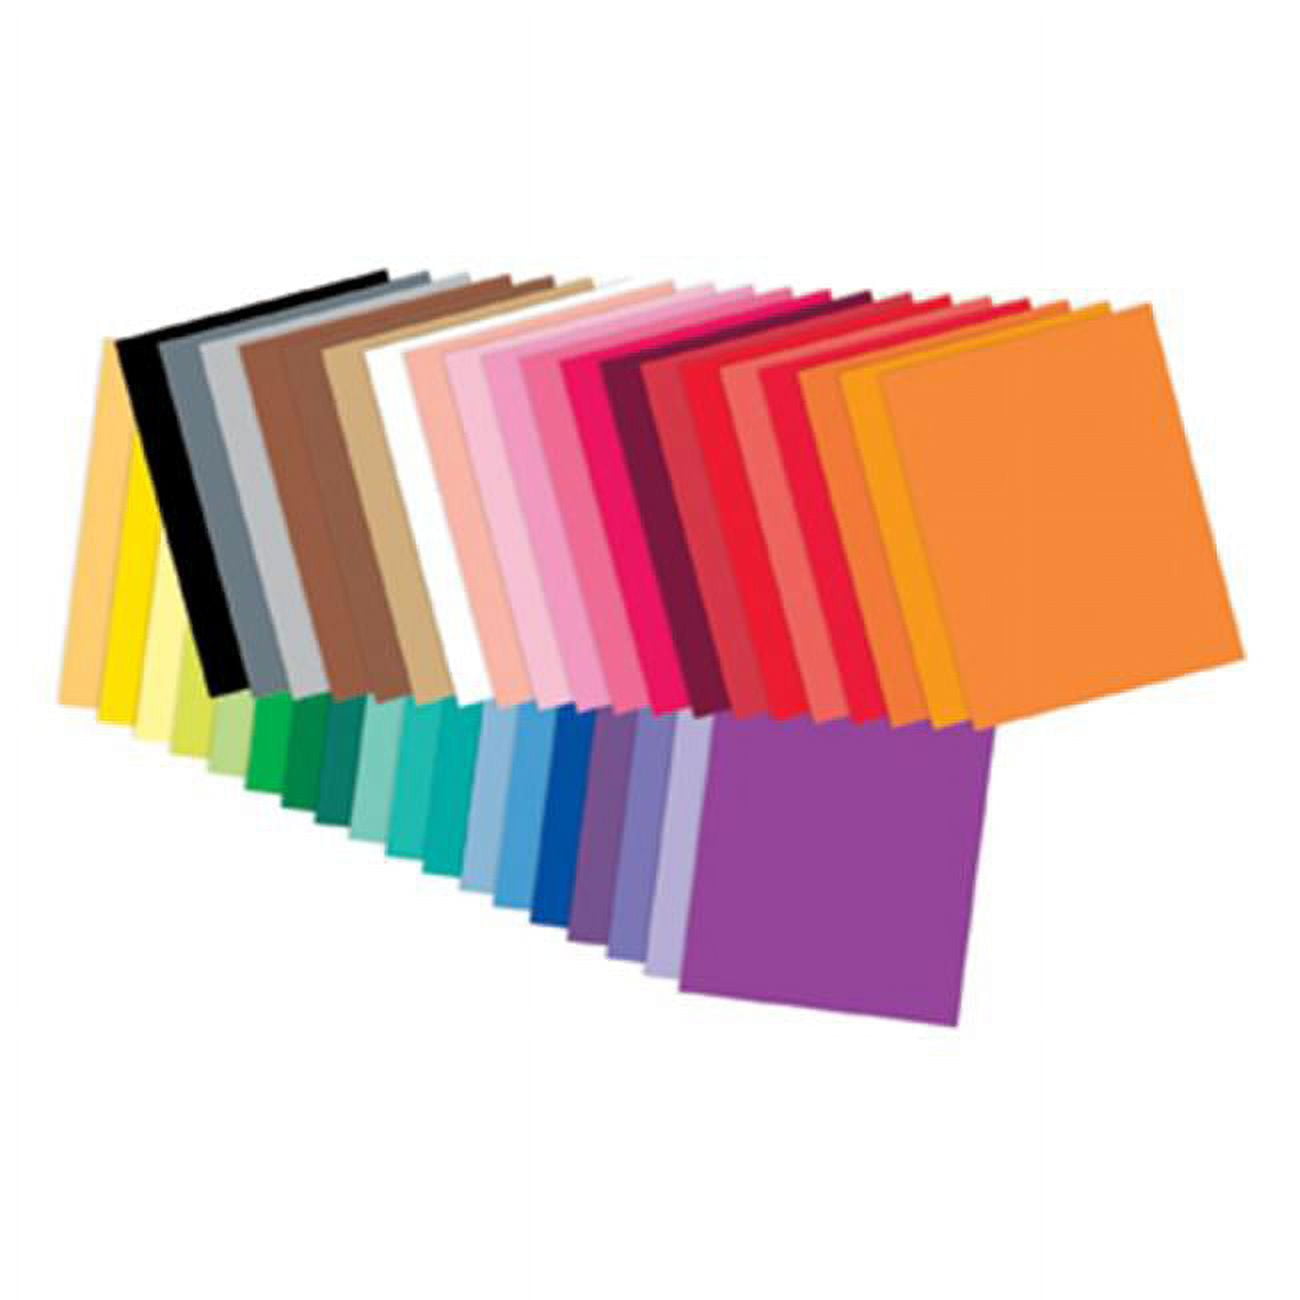 Tru Ray Construction Paper 50percent Recycled Assorted Colors 18 x